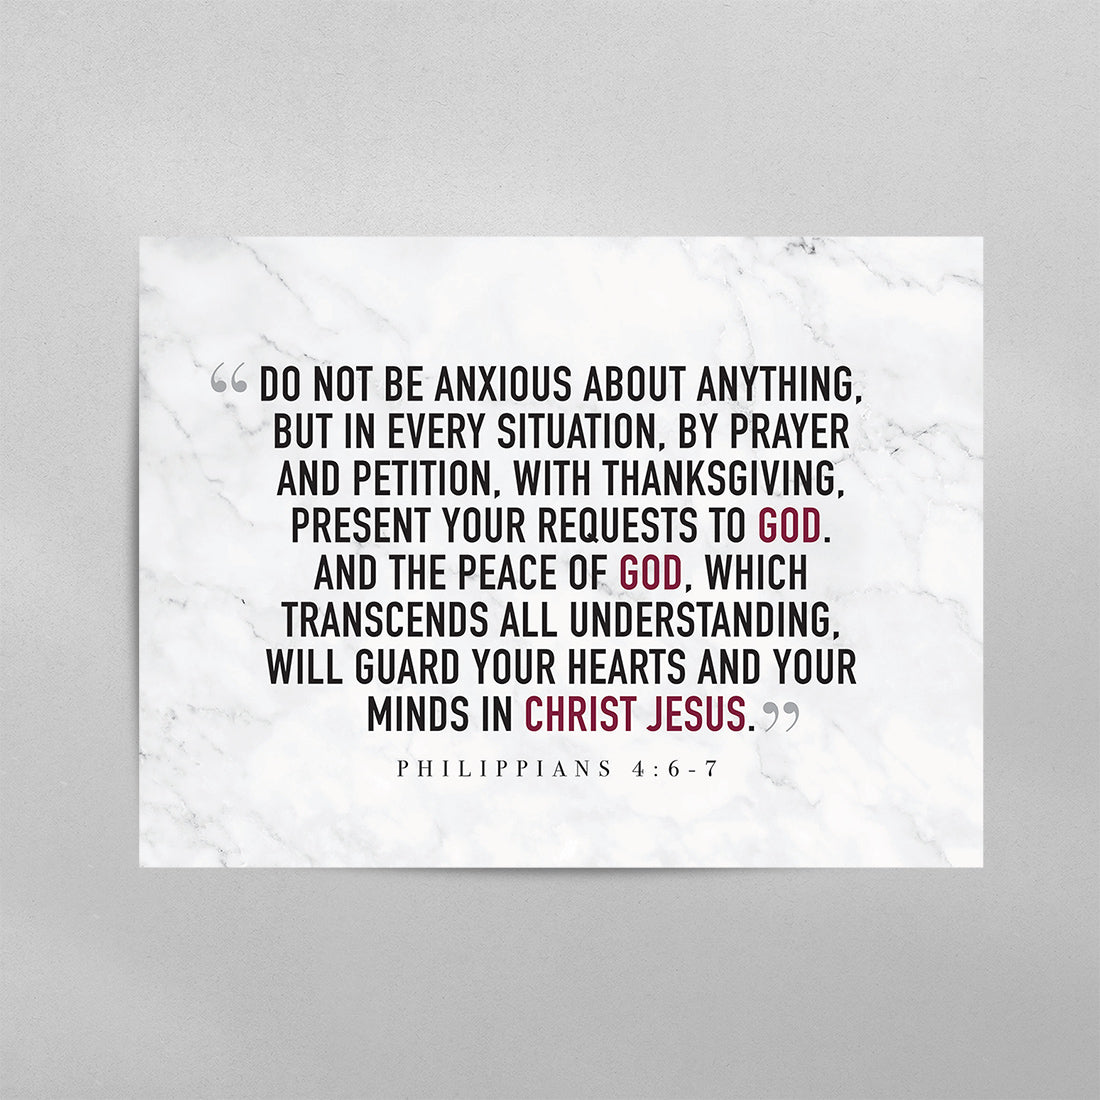 Philippians 4:6-7 Poster for Anxiety